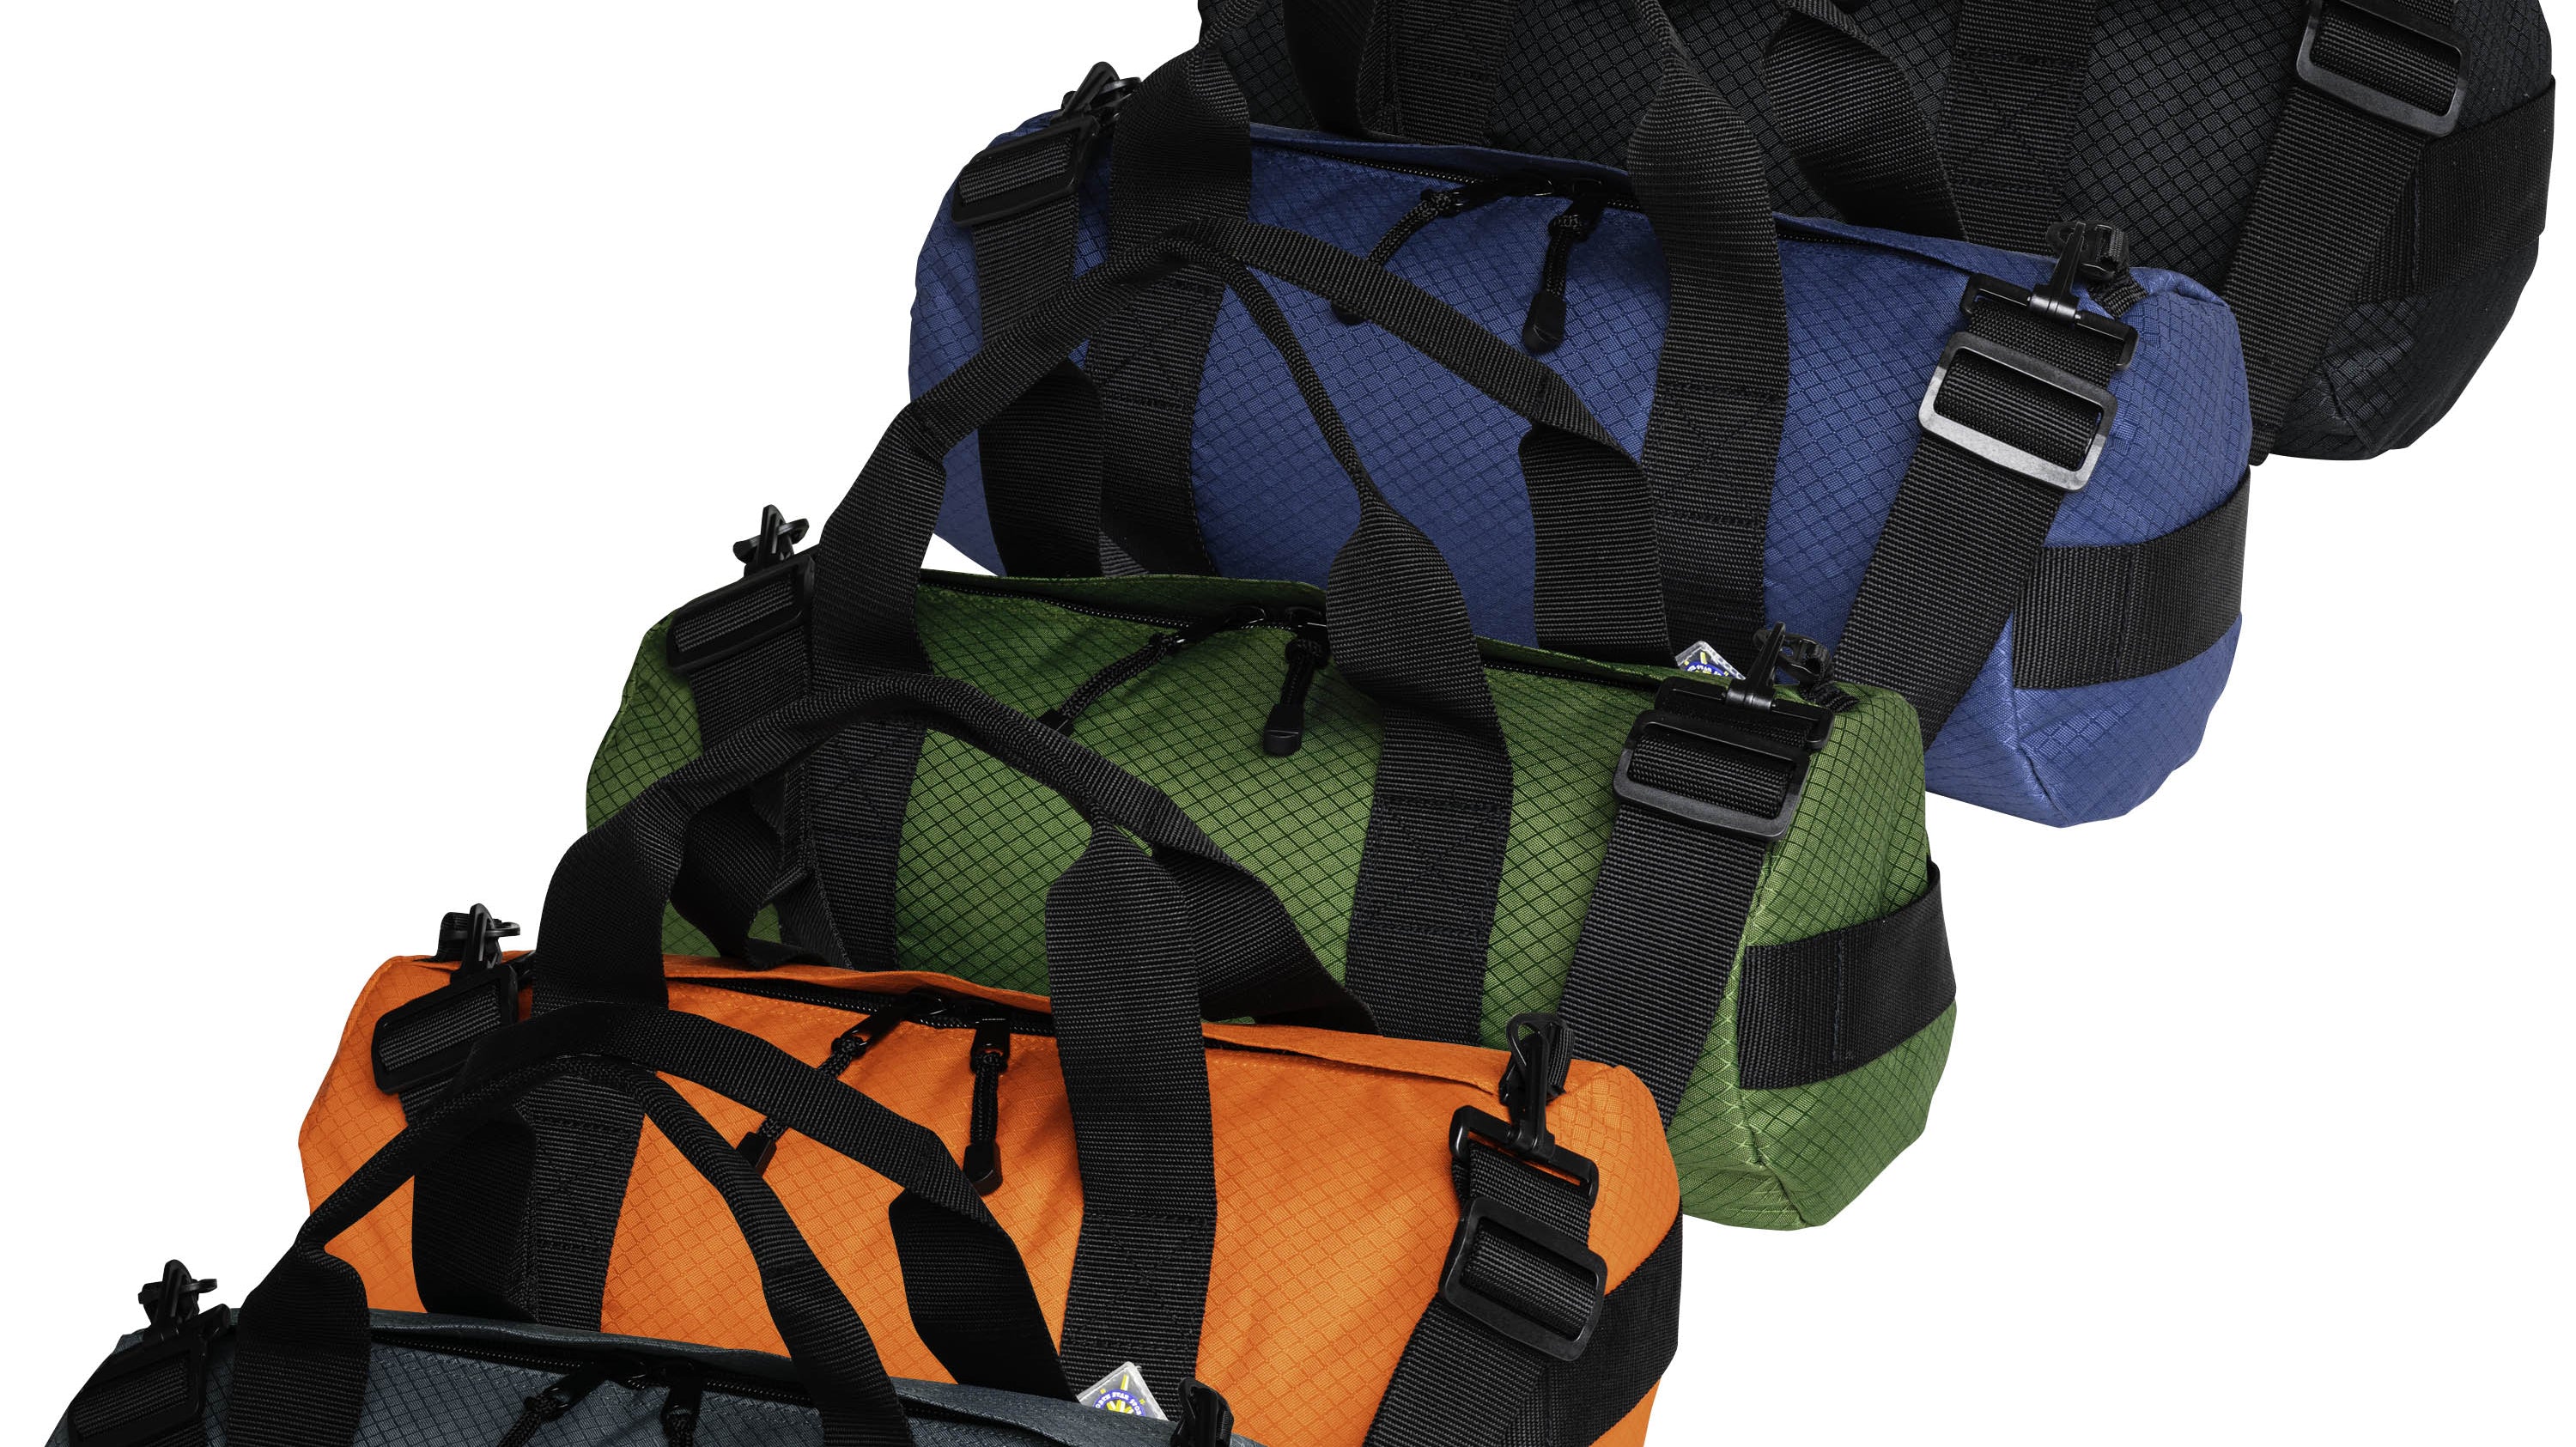 Announcing Two New Small Tough Gear Bags, 14 Liter and 25 Liter Sizes